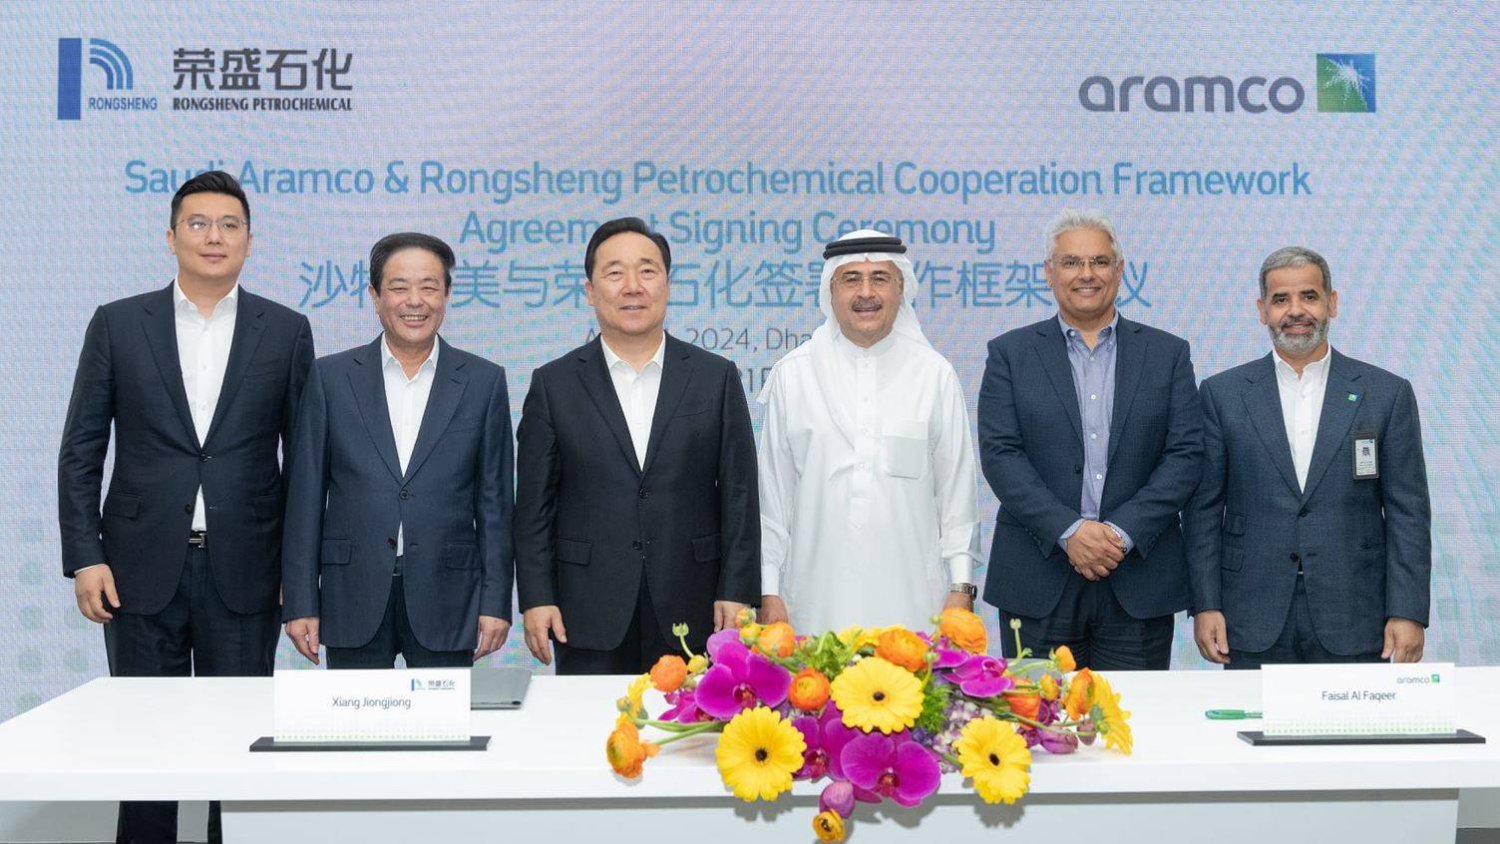 Pictured, from left, at the cooperation framework agreement signing ceremony are Xiang Jiongjiong, Zhejiang Rongsheng Holding Group Vice Chairman and Rongsheng Petrochemical CEO; Li Shuirong, Zhejiang Rongsheng Holding Group Chairman; Wang Hao, Zhejiang Provincial Government Governor; Amin H. Nasser, Aramco President & CEO; Mohammed Y. Al Qahtani, Aramco Downstream President; and Faisal M. Al Faqeer, Aramco Senior Vice President of In Kingdom Liquids to Chemicals Development. Photo: Aramco